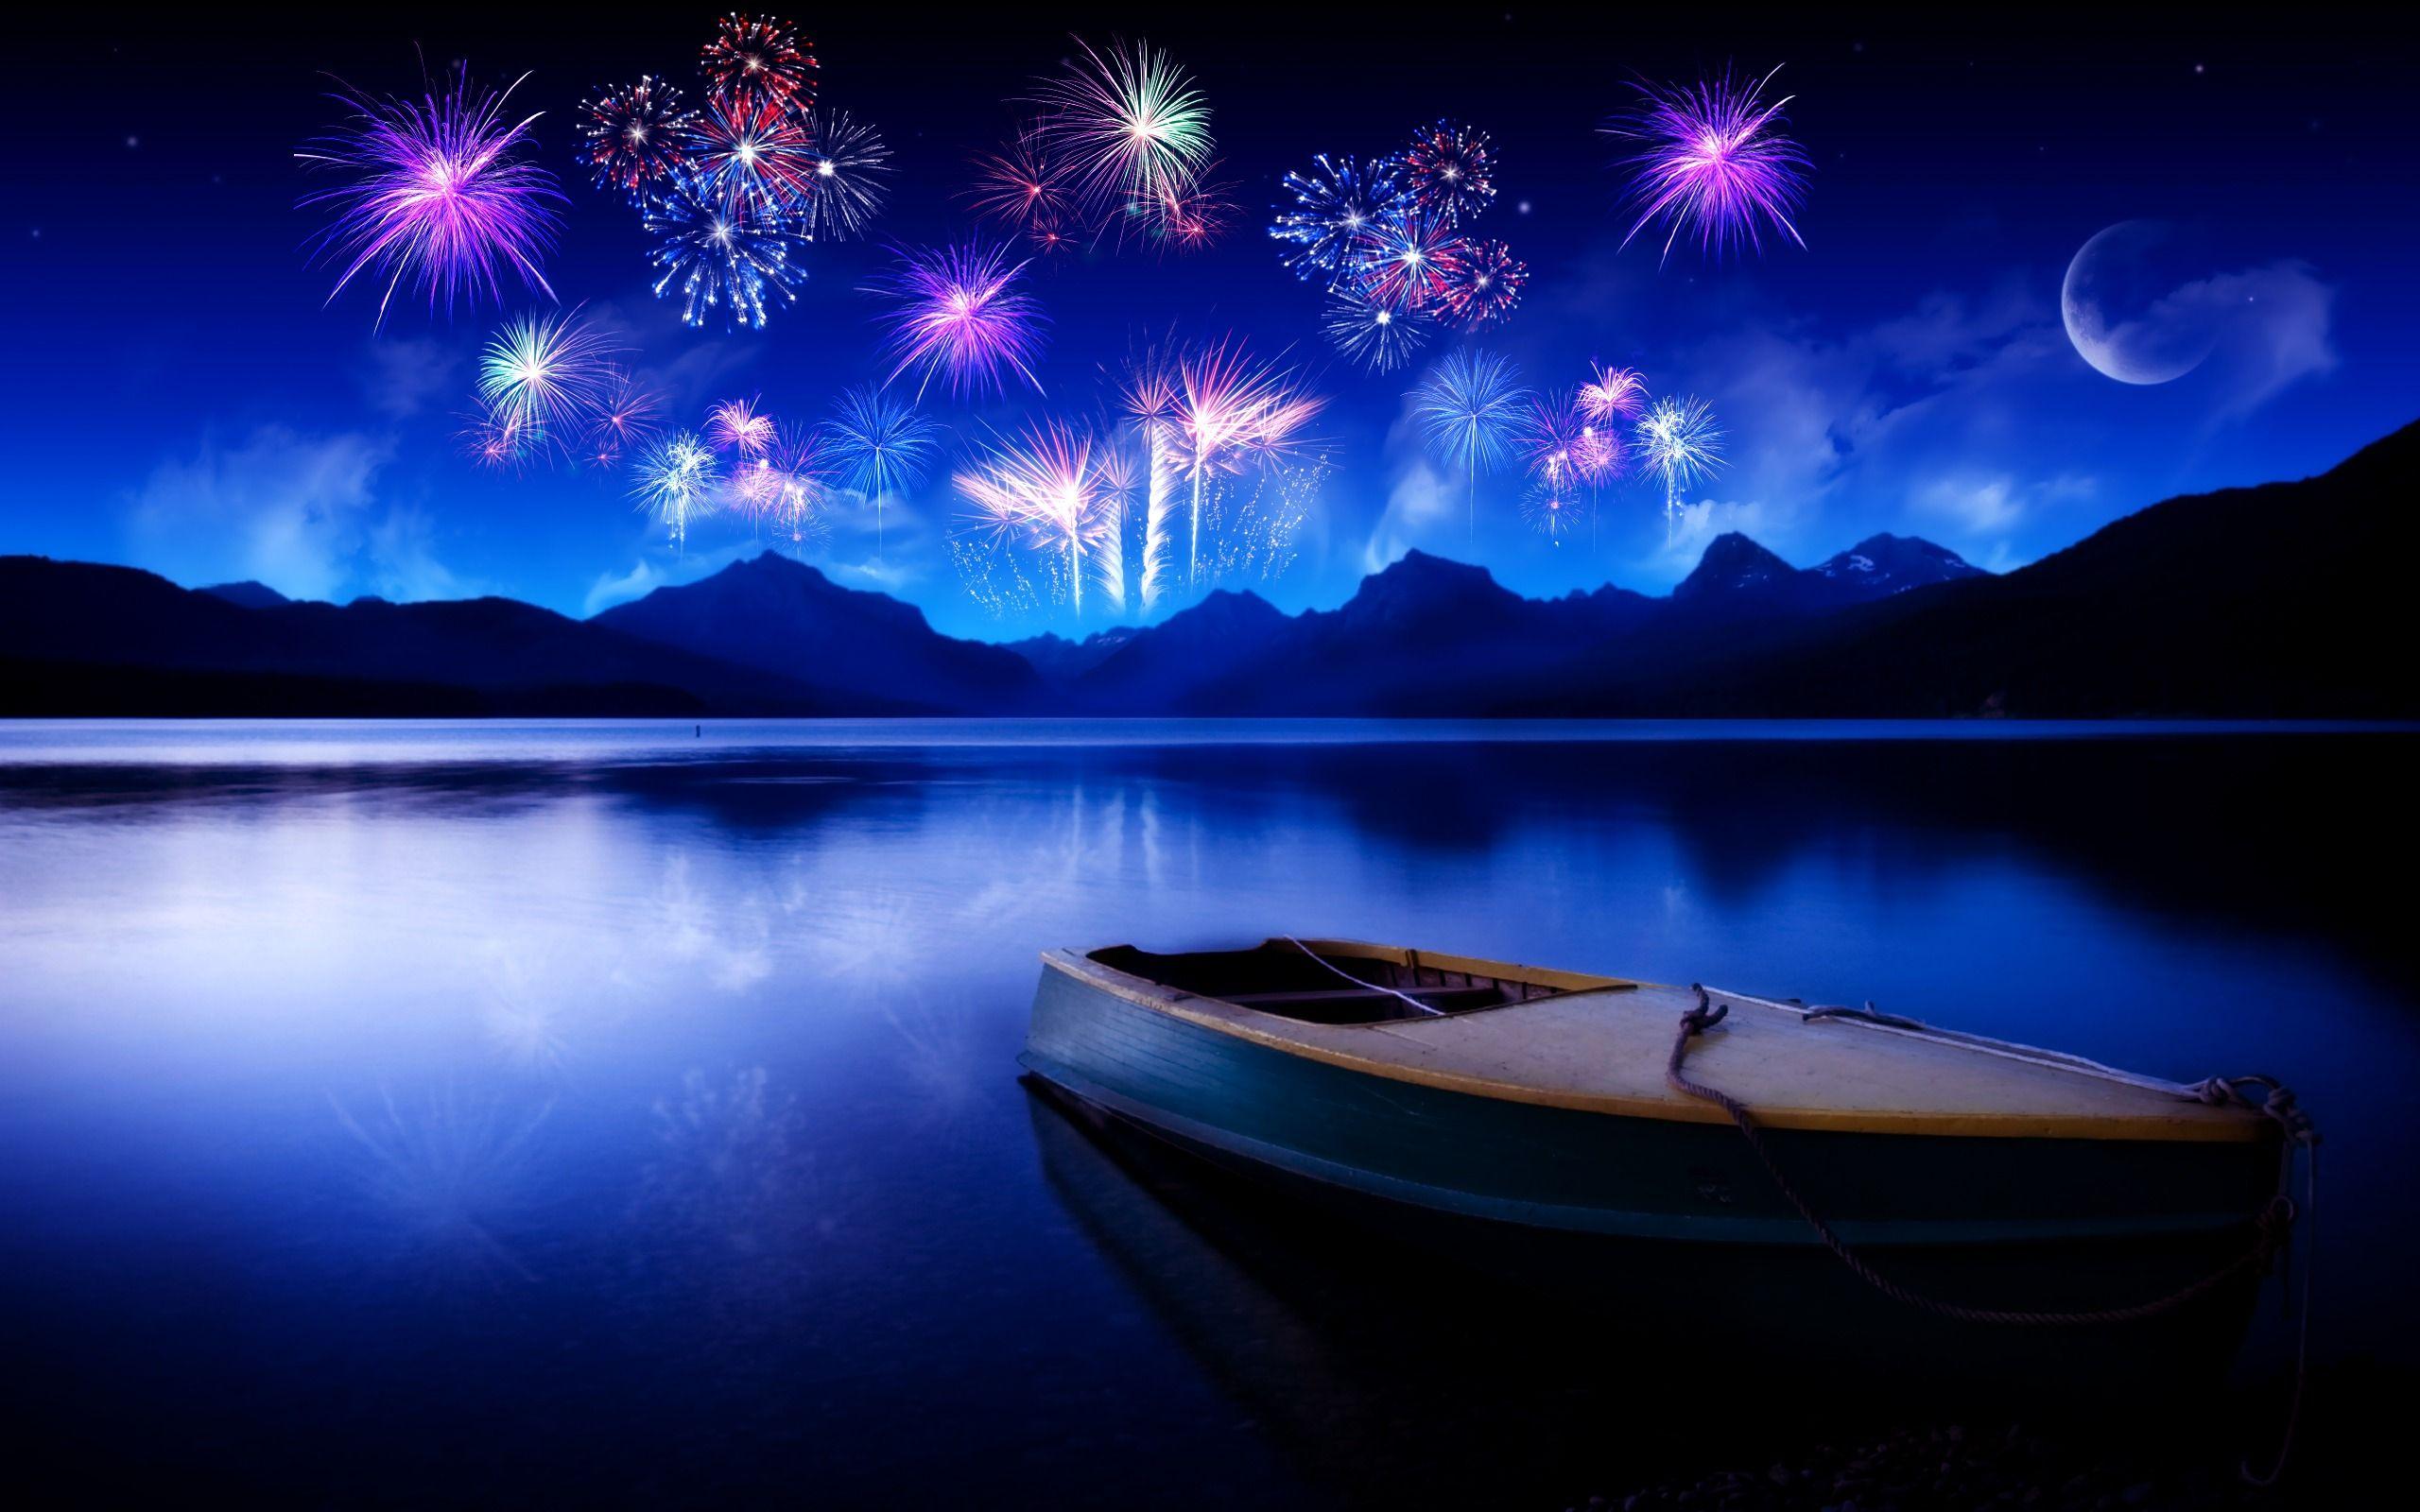 Firework Night wallpaper and image, picture, photo